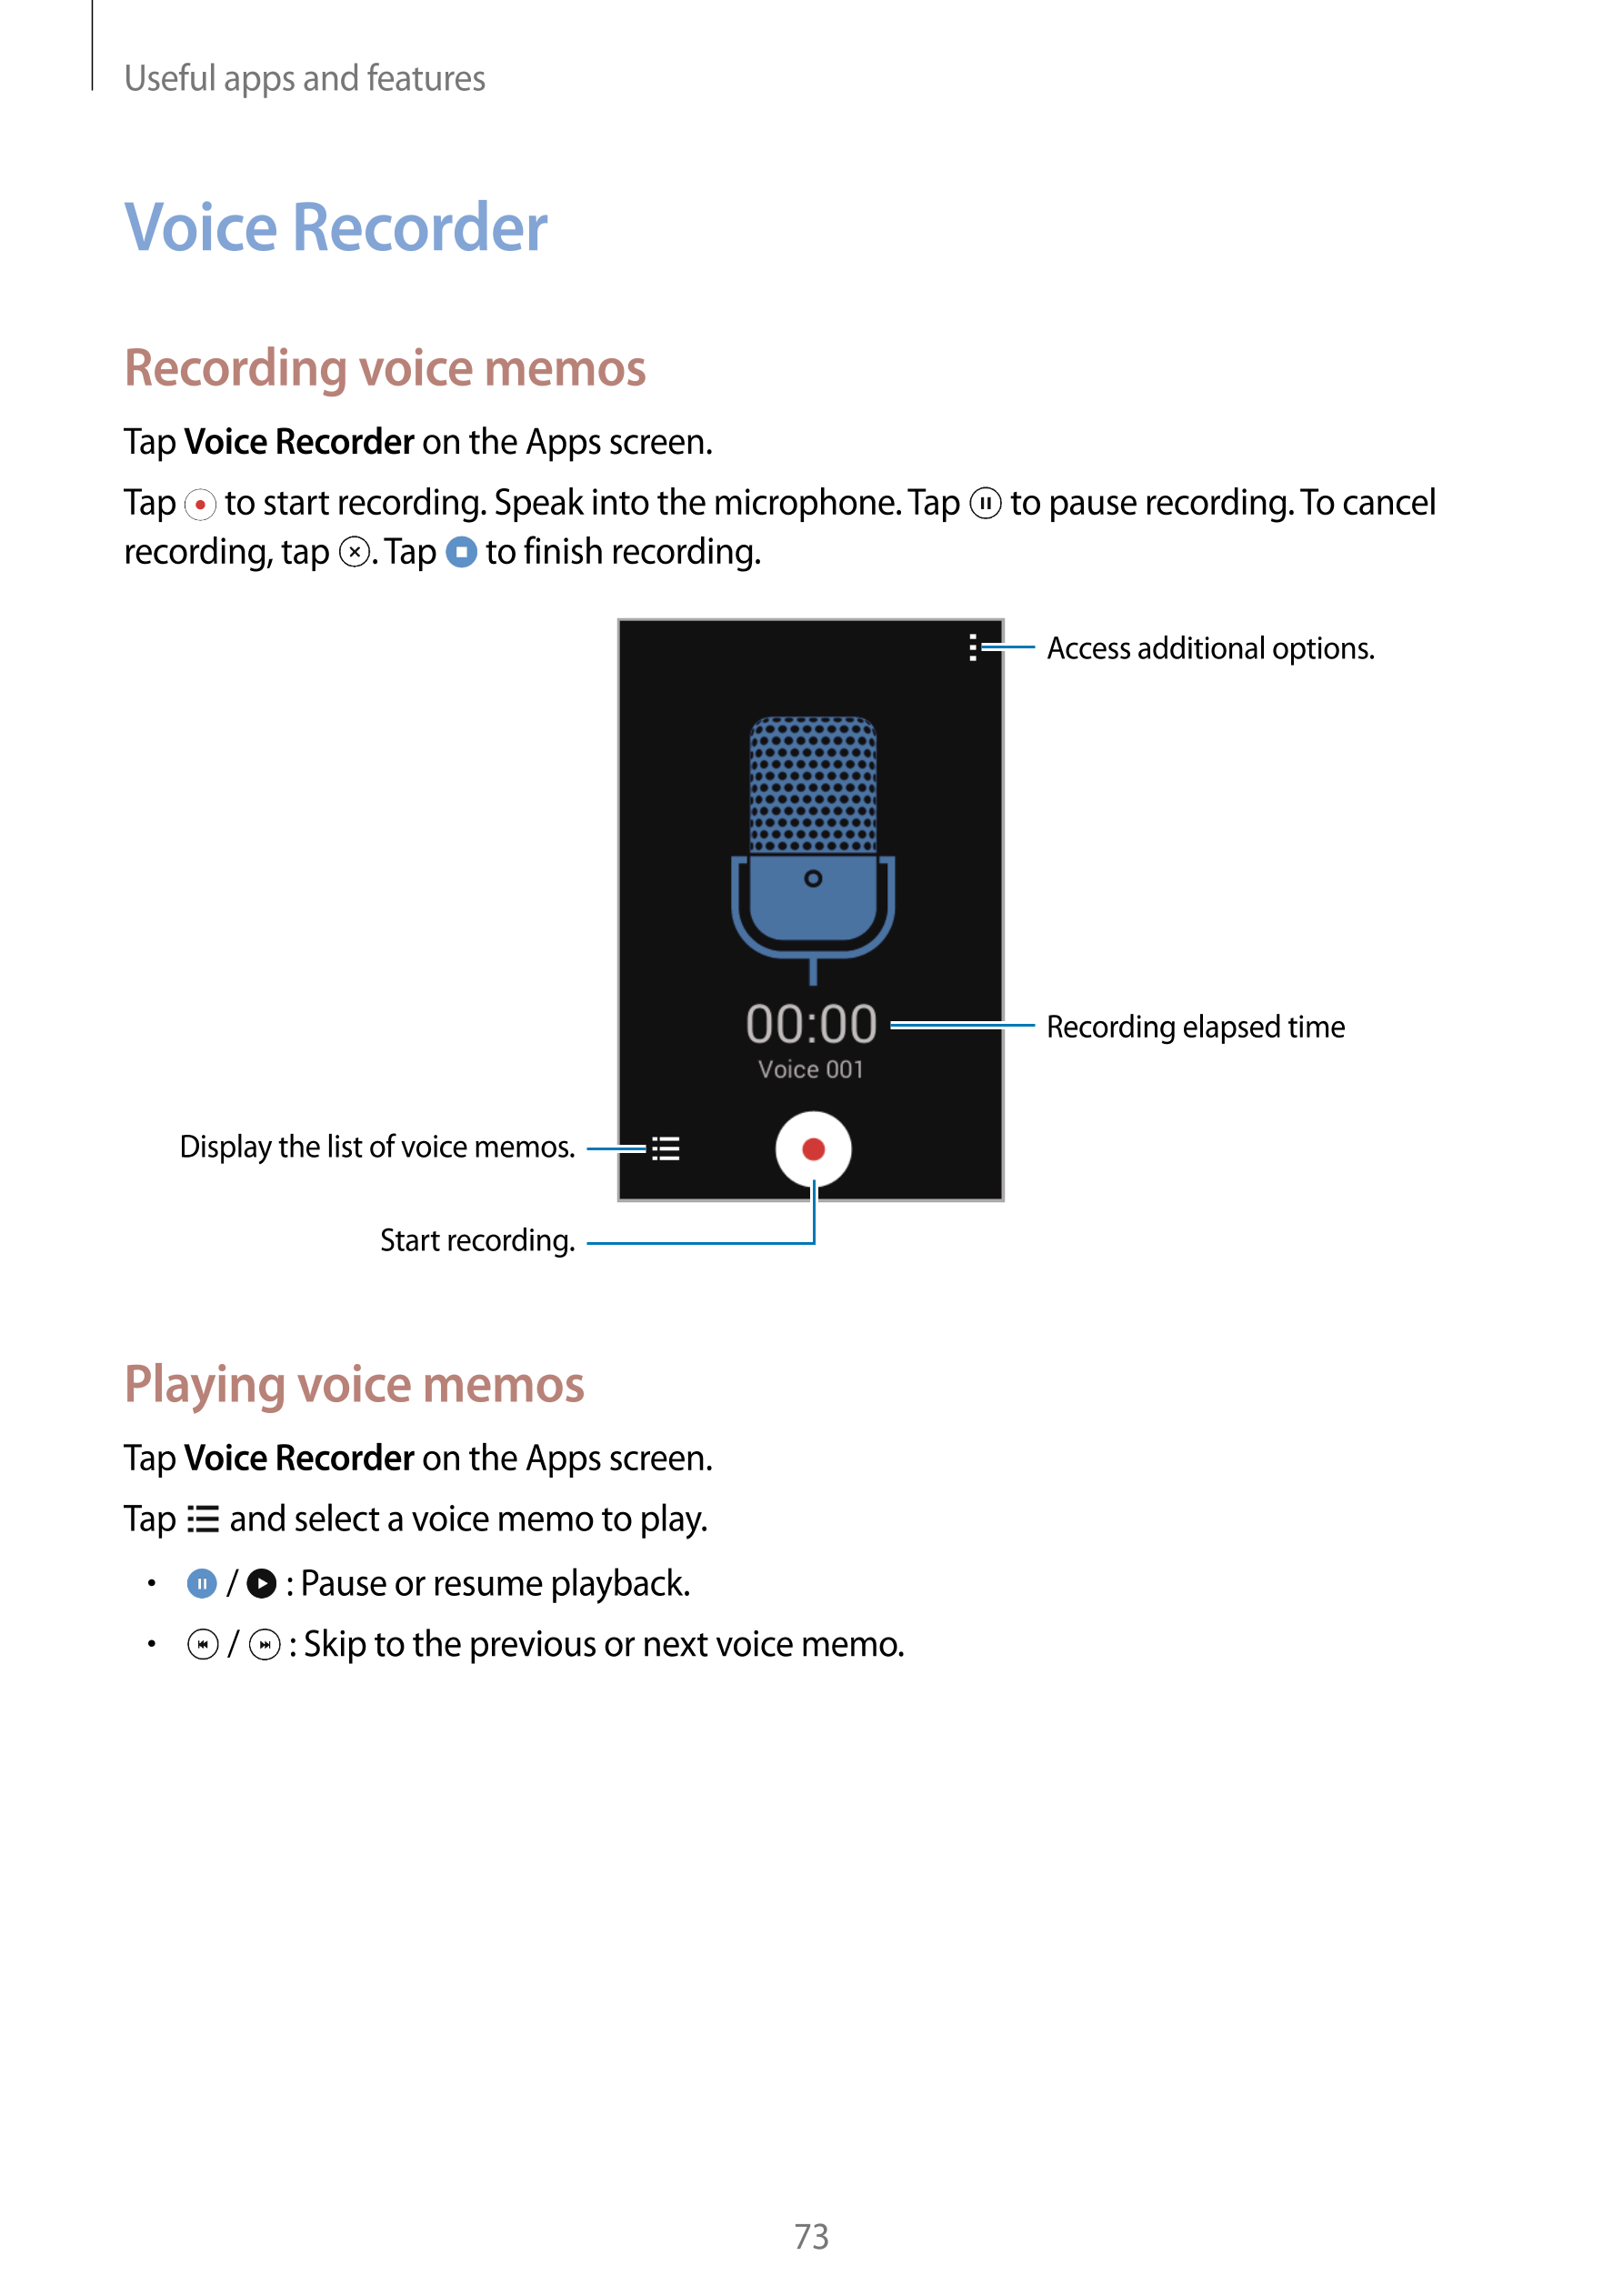 Useful apps and features
Voice Recorder
Recording voice memos
Tap  Voice Recorder on the Apps screen.
Tap   to start recording. 